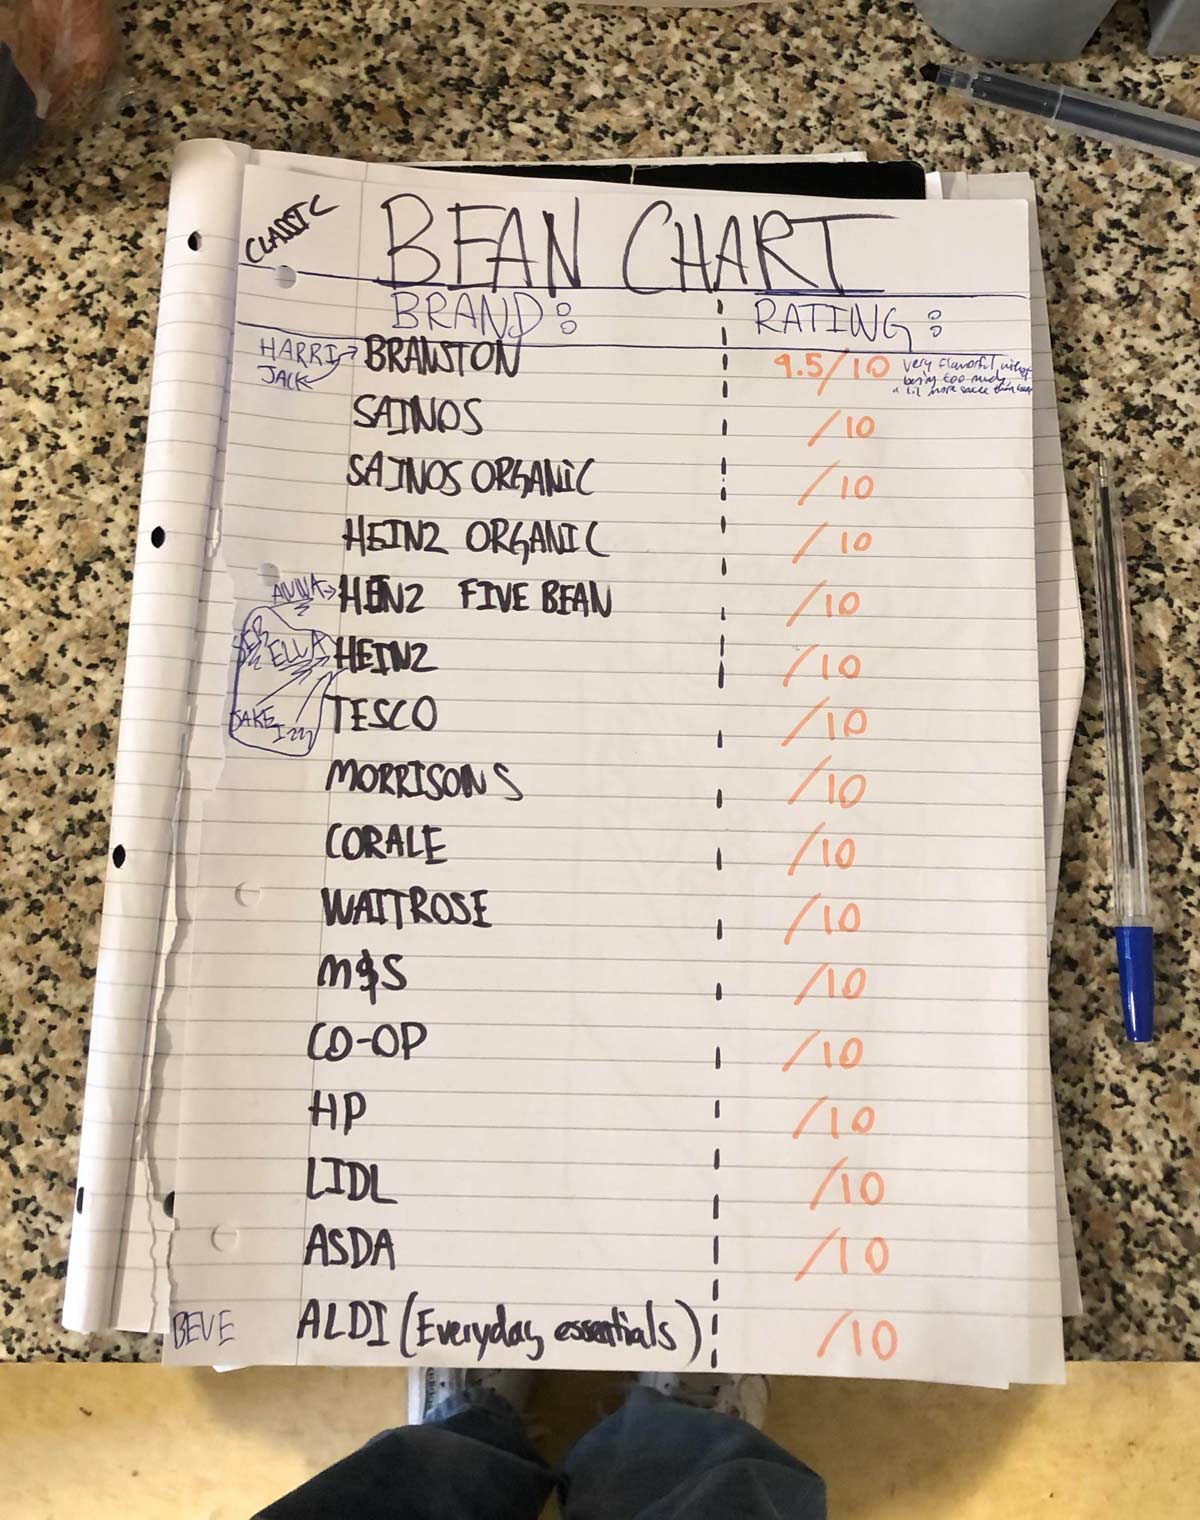 My Brazilian friend, newly enamored with beans on toast, has made it his mission to test and rank all UK beans